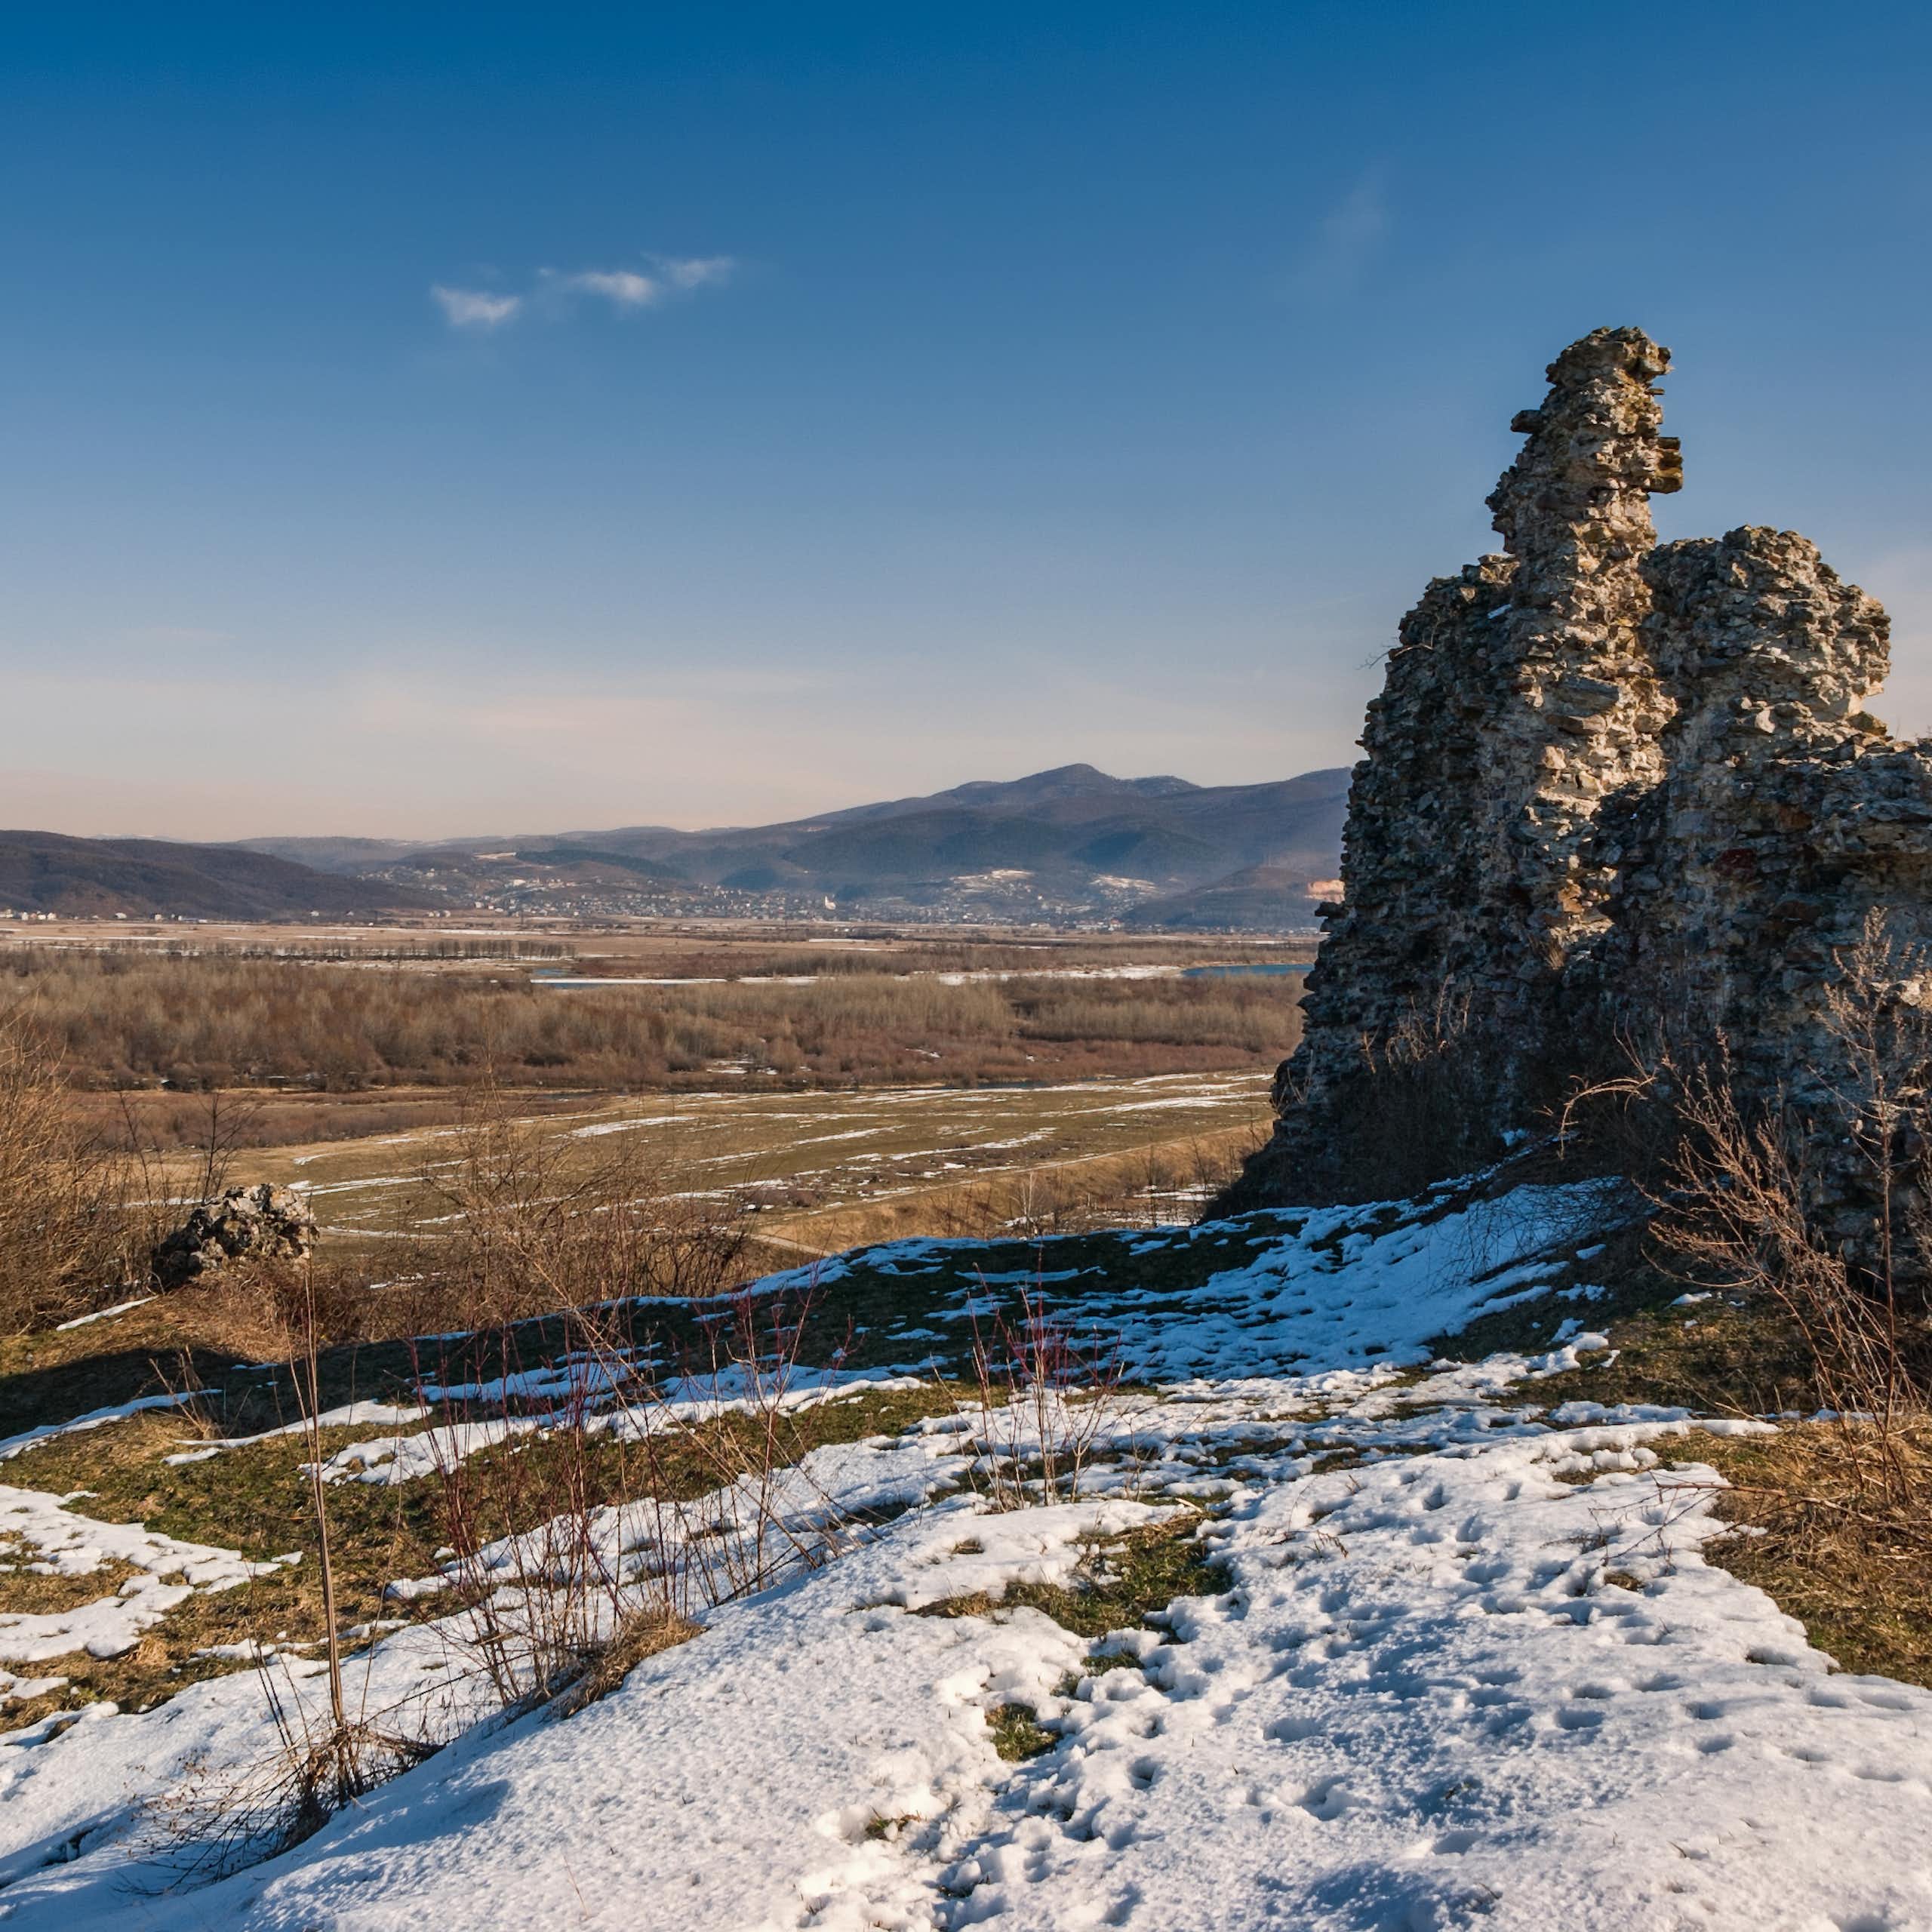 Remains of the castle in Korolevo, close to the site.